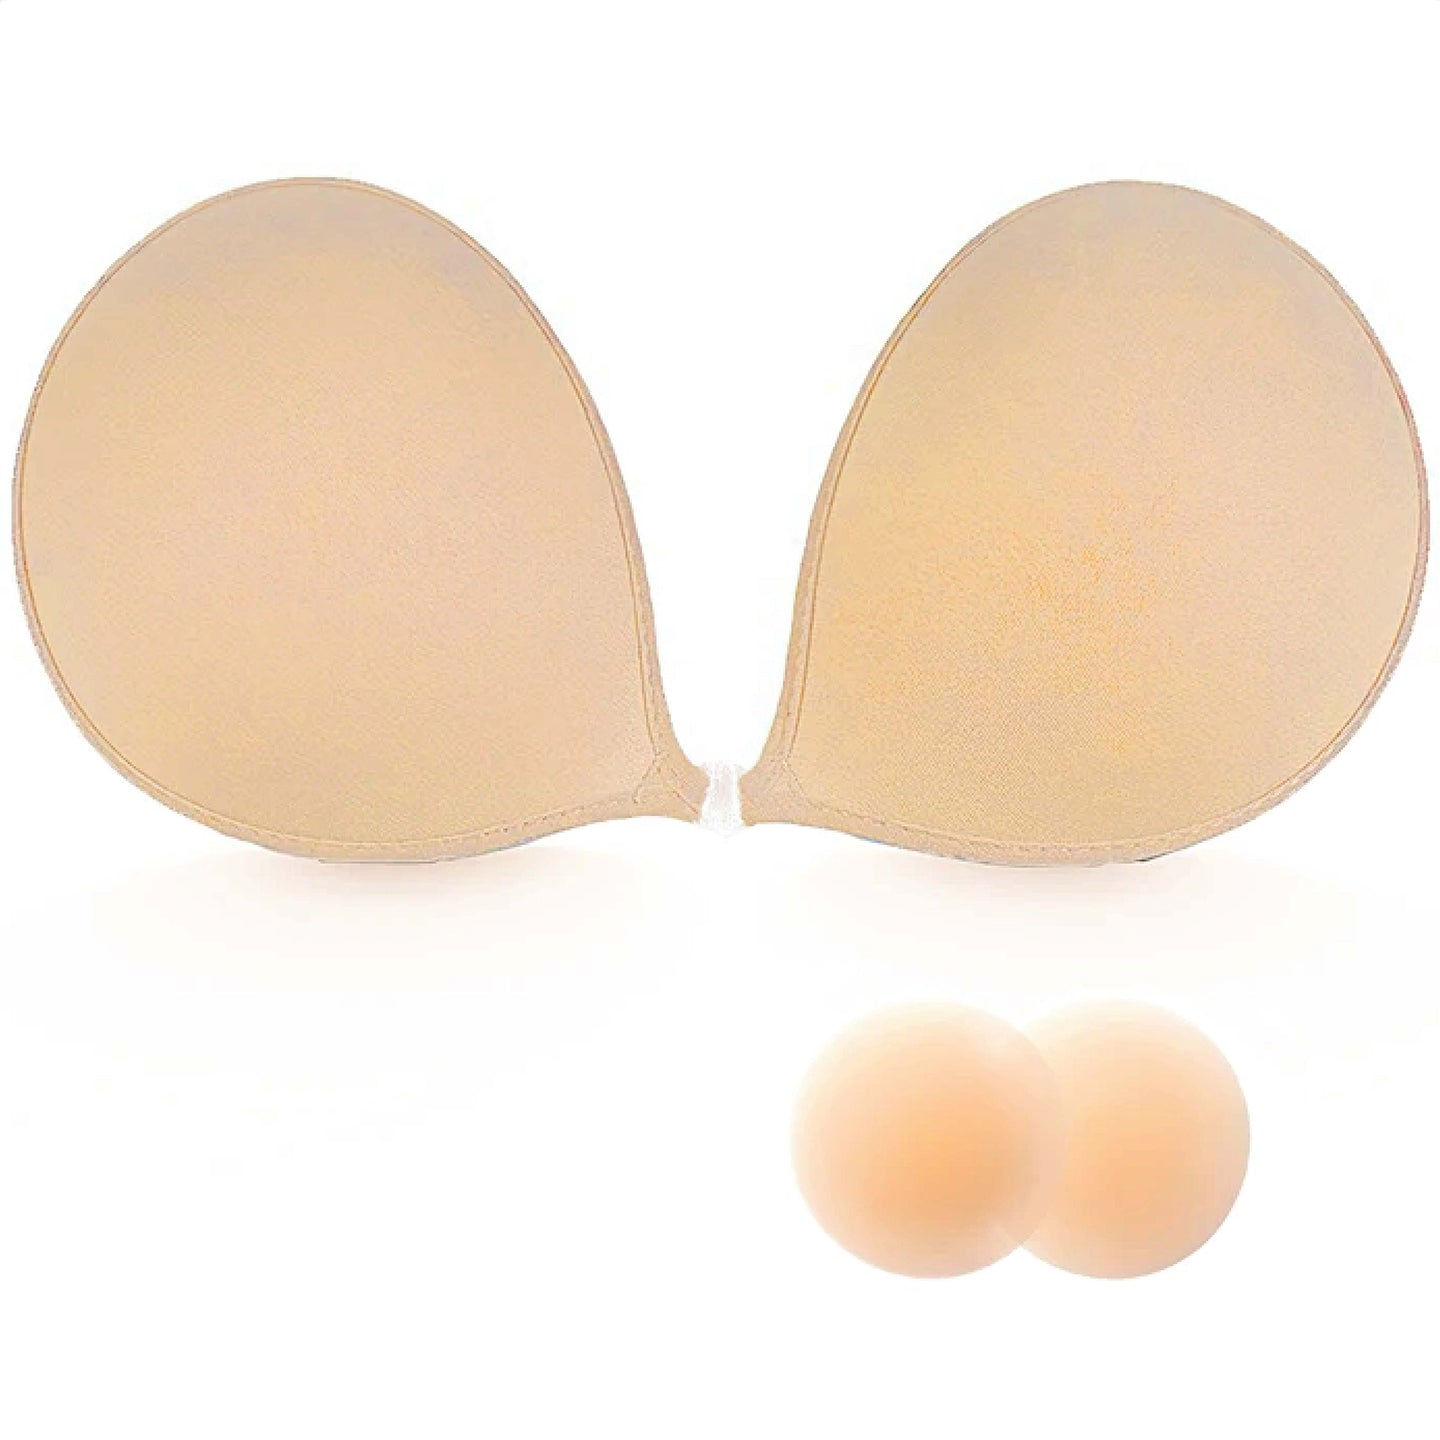 Invisible bra has 5 star reviews. Comes in sizes B, C, and D